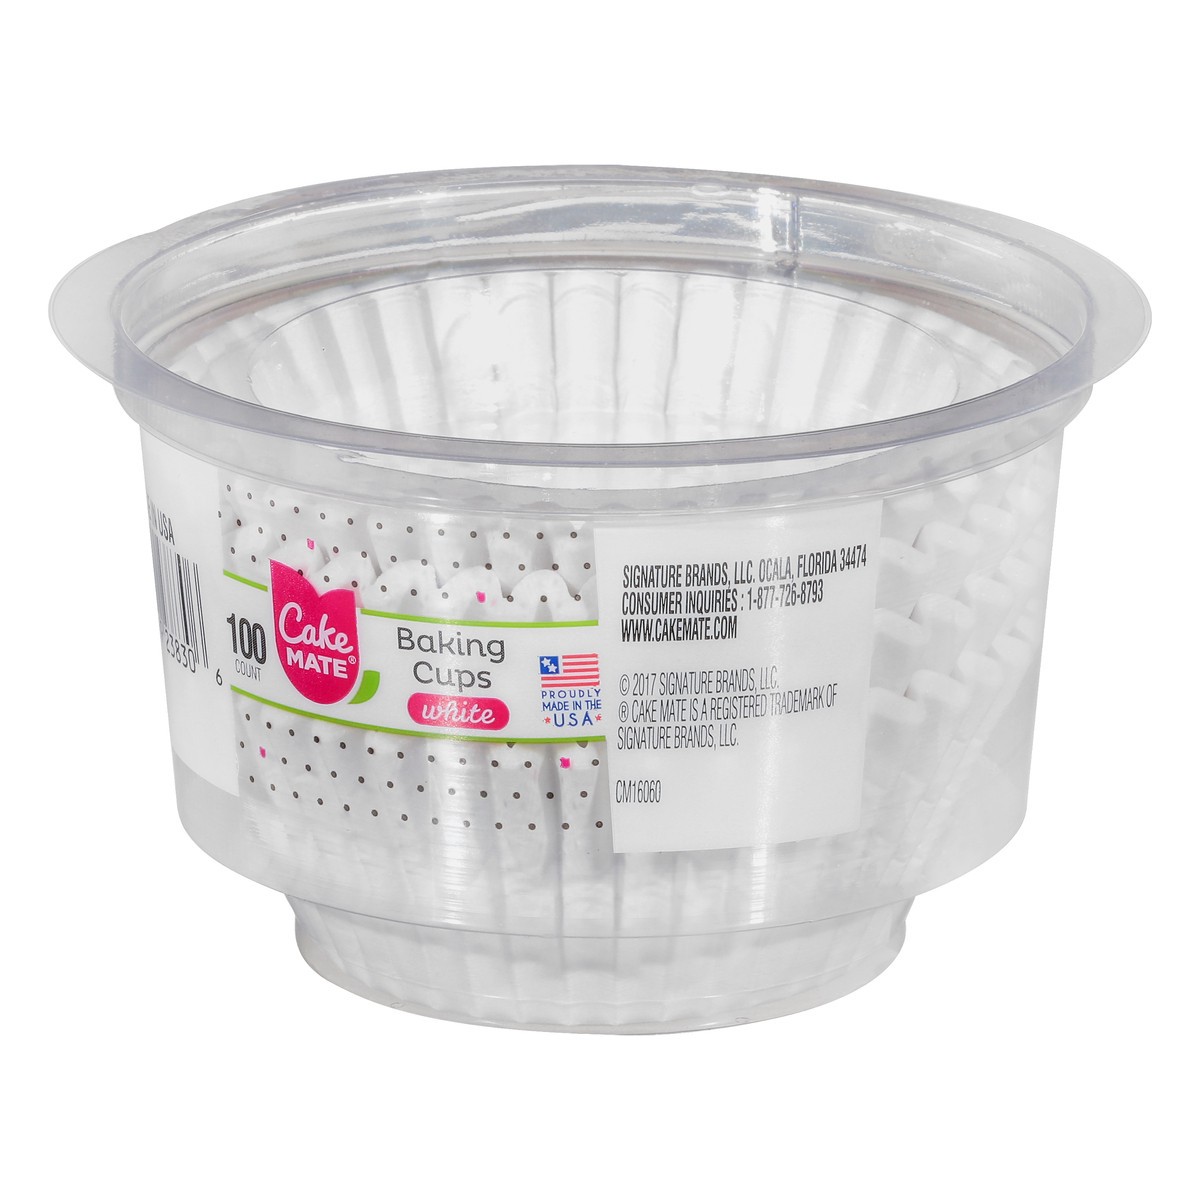 slide 3 of 9, Cake Mate Baking Cup White, 100 ct